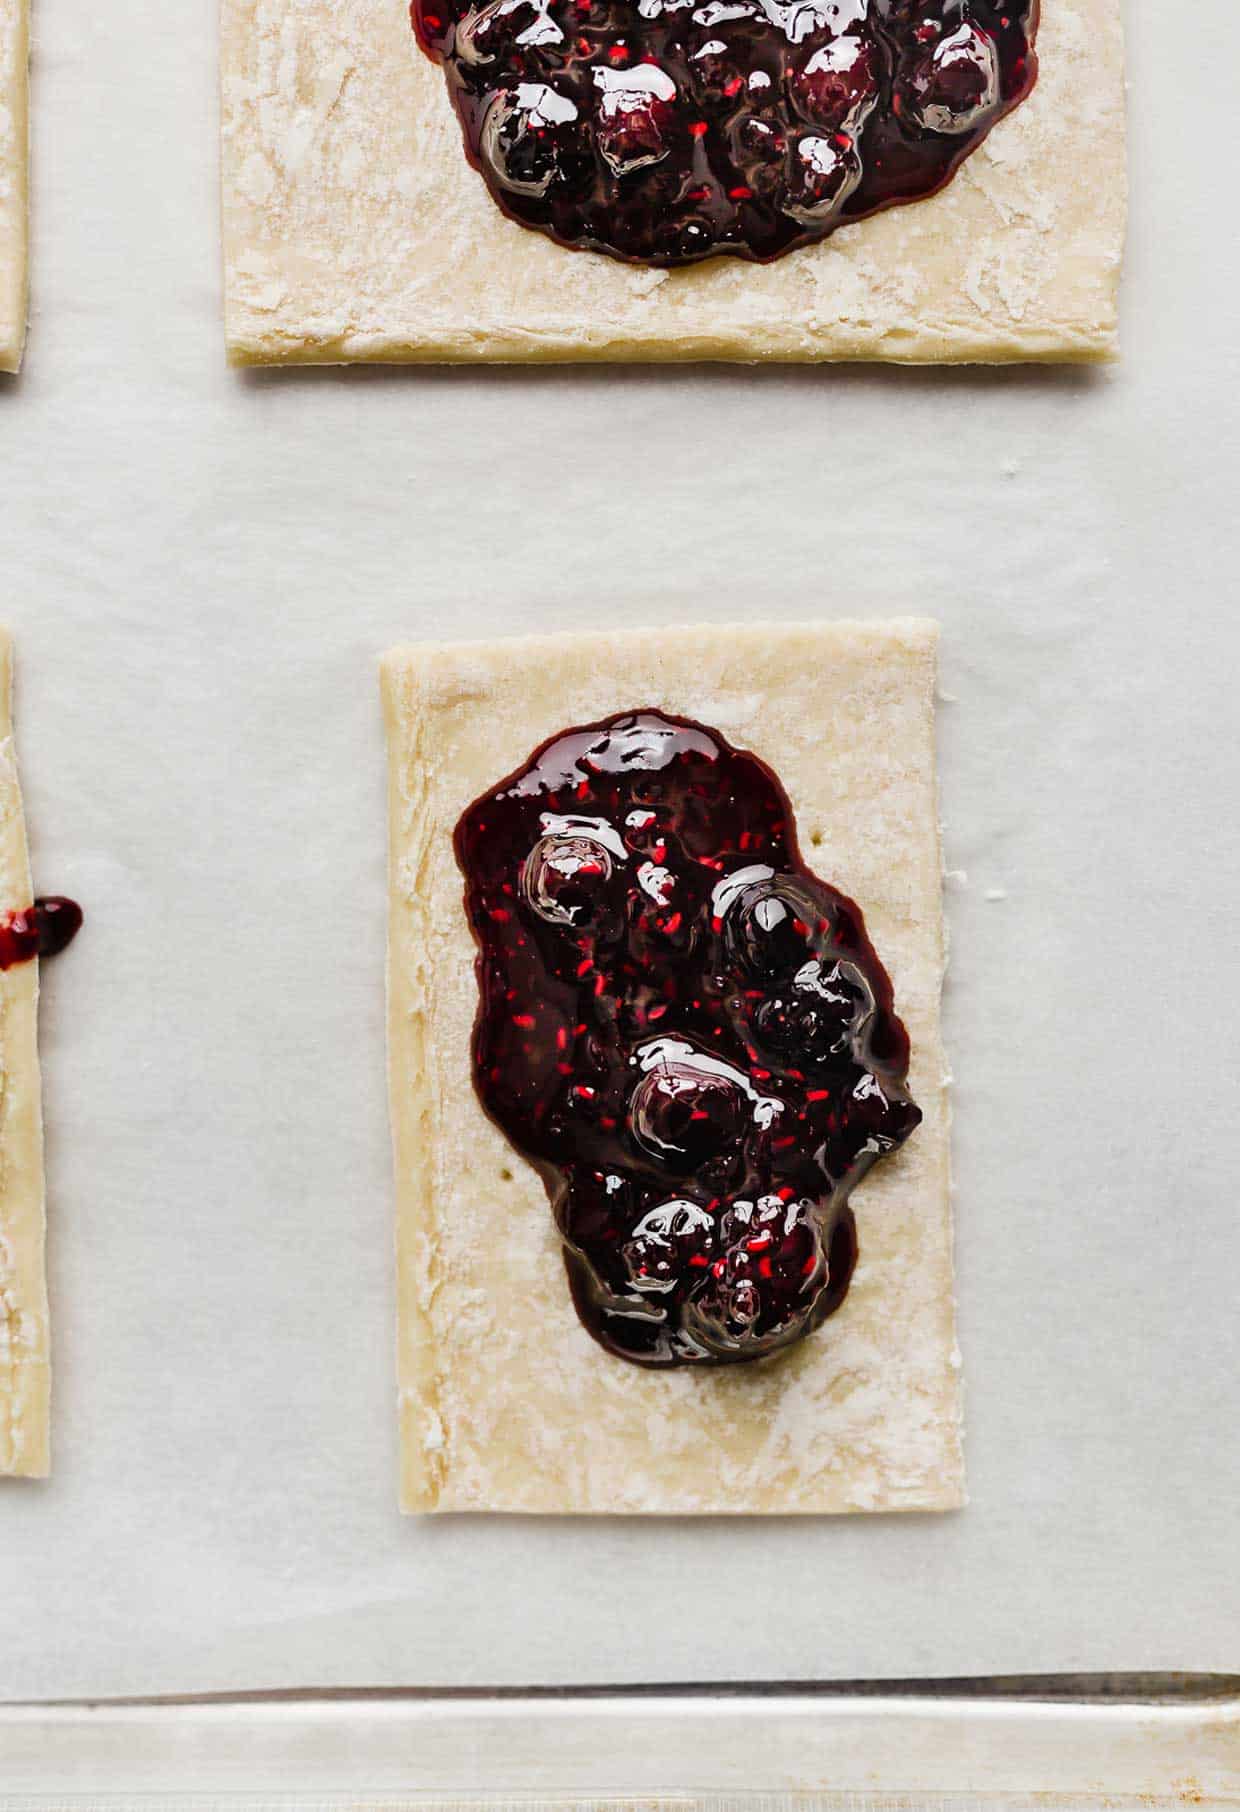 A triple berry jam dolloped in the center of a rectangular puff pastry sheet.